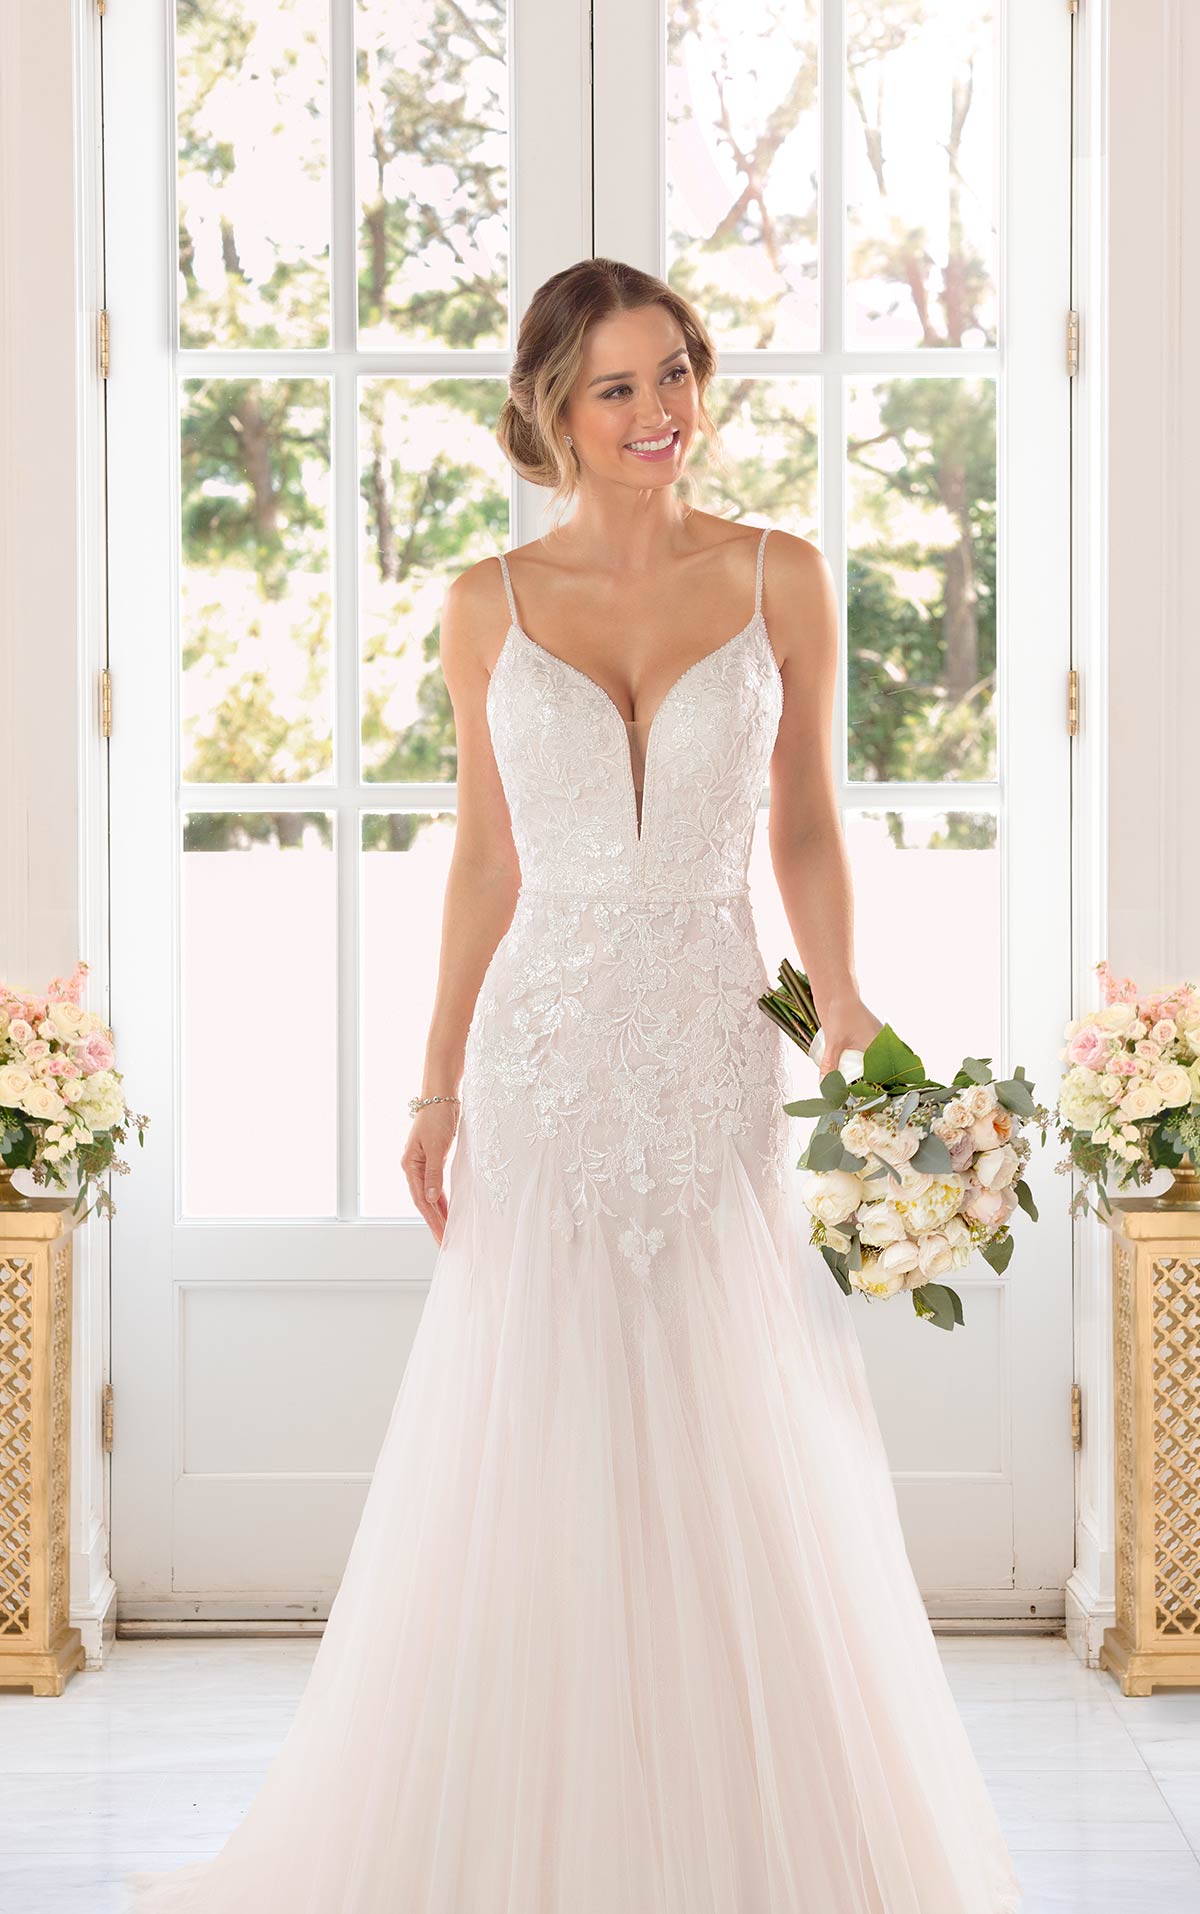 Shimmering A-line Wedding Dress with Floral Pattern and Voluminous Skirt -  Stella York Wedding Dresses